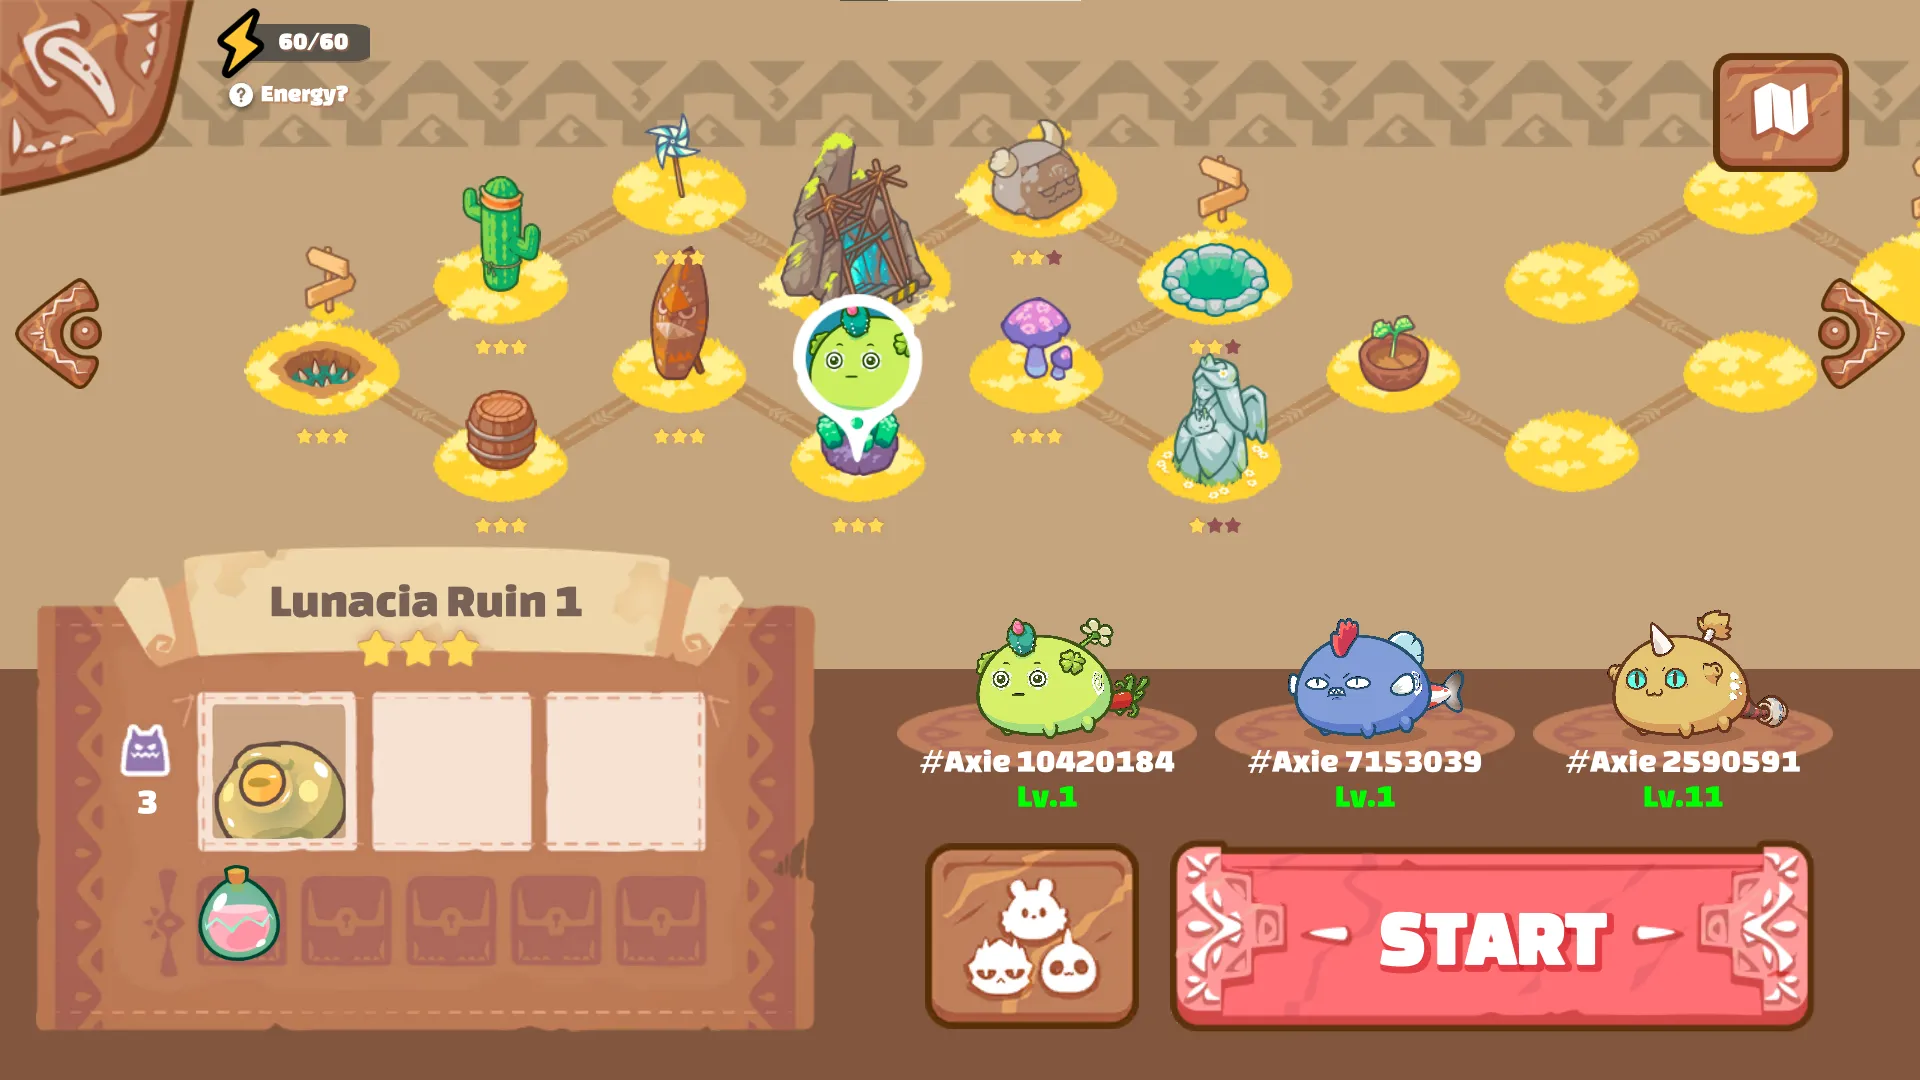 Axie Infinity Adventure map shows a player's progress in the mode. Players are granted stars based on how many Axies are still alive when they complete the game.